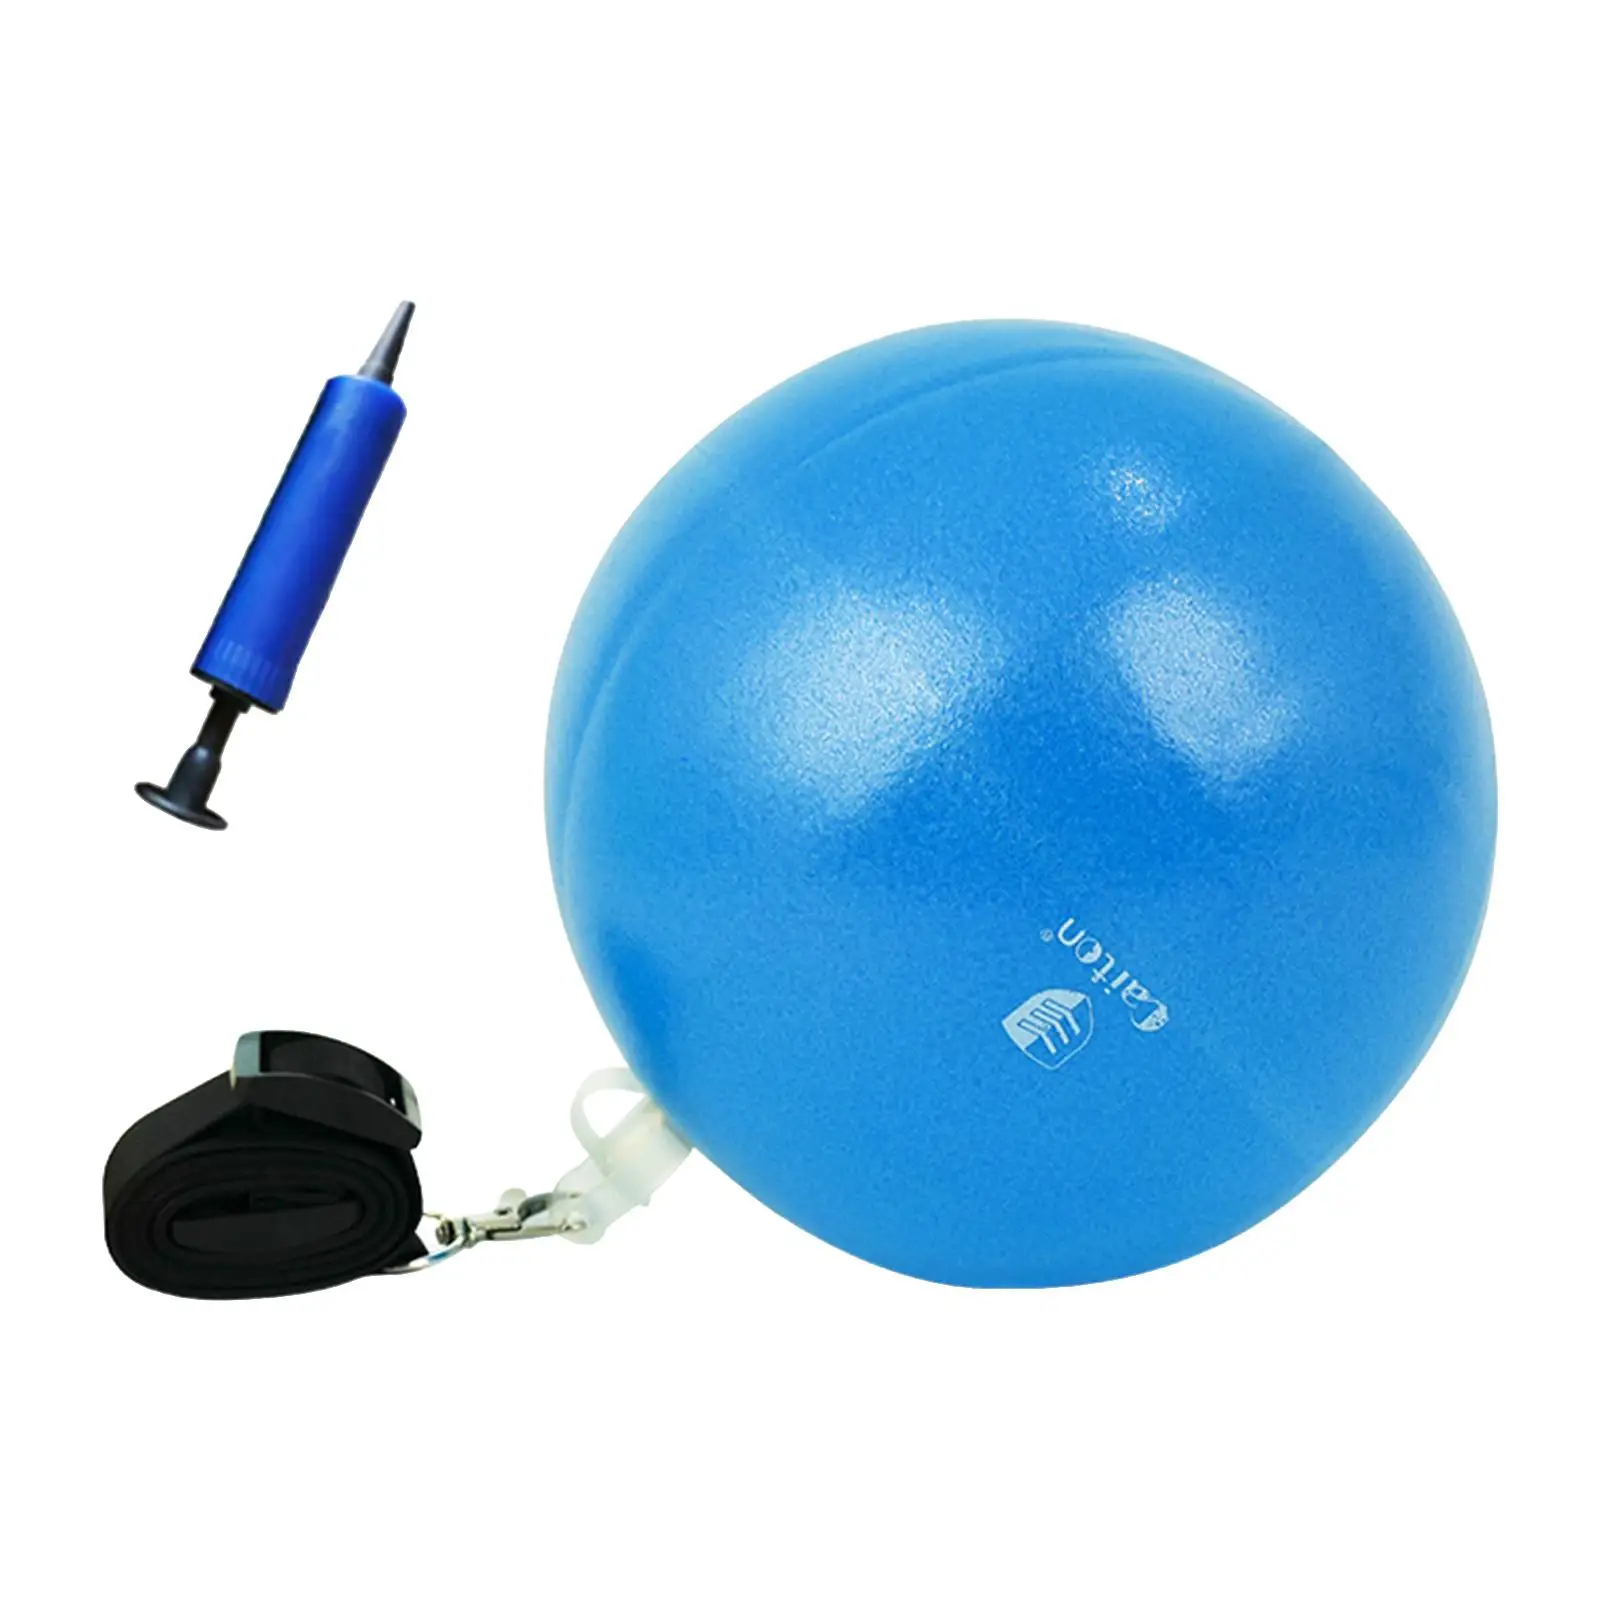 Golf Swing Trainer Ball Assist W/ Adjustable Lanyard Supplies Practice for Posture Correction Golfer Practing